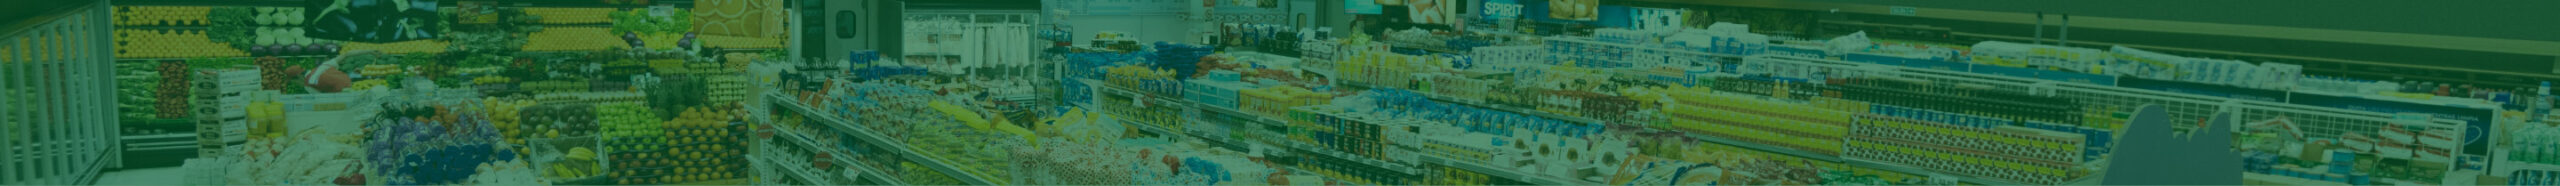 a blurry picture of the inside of a grocery store